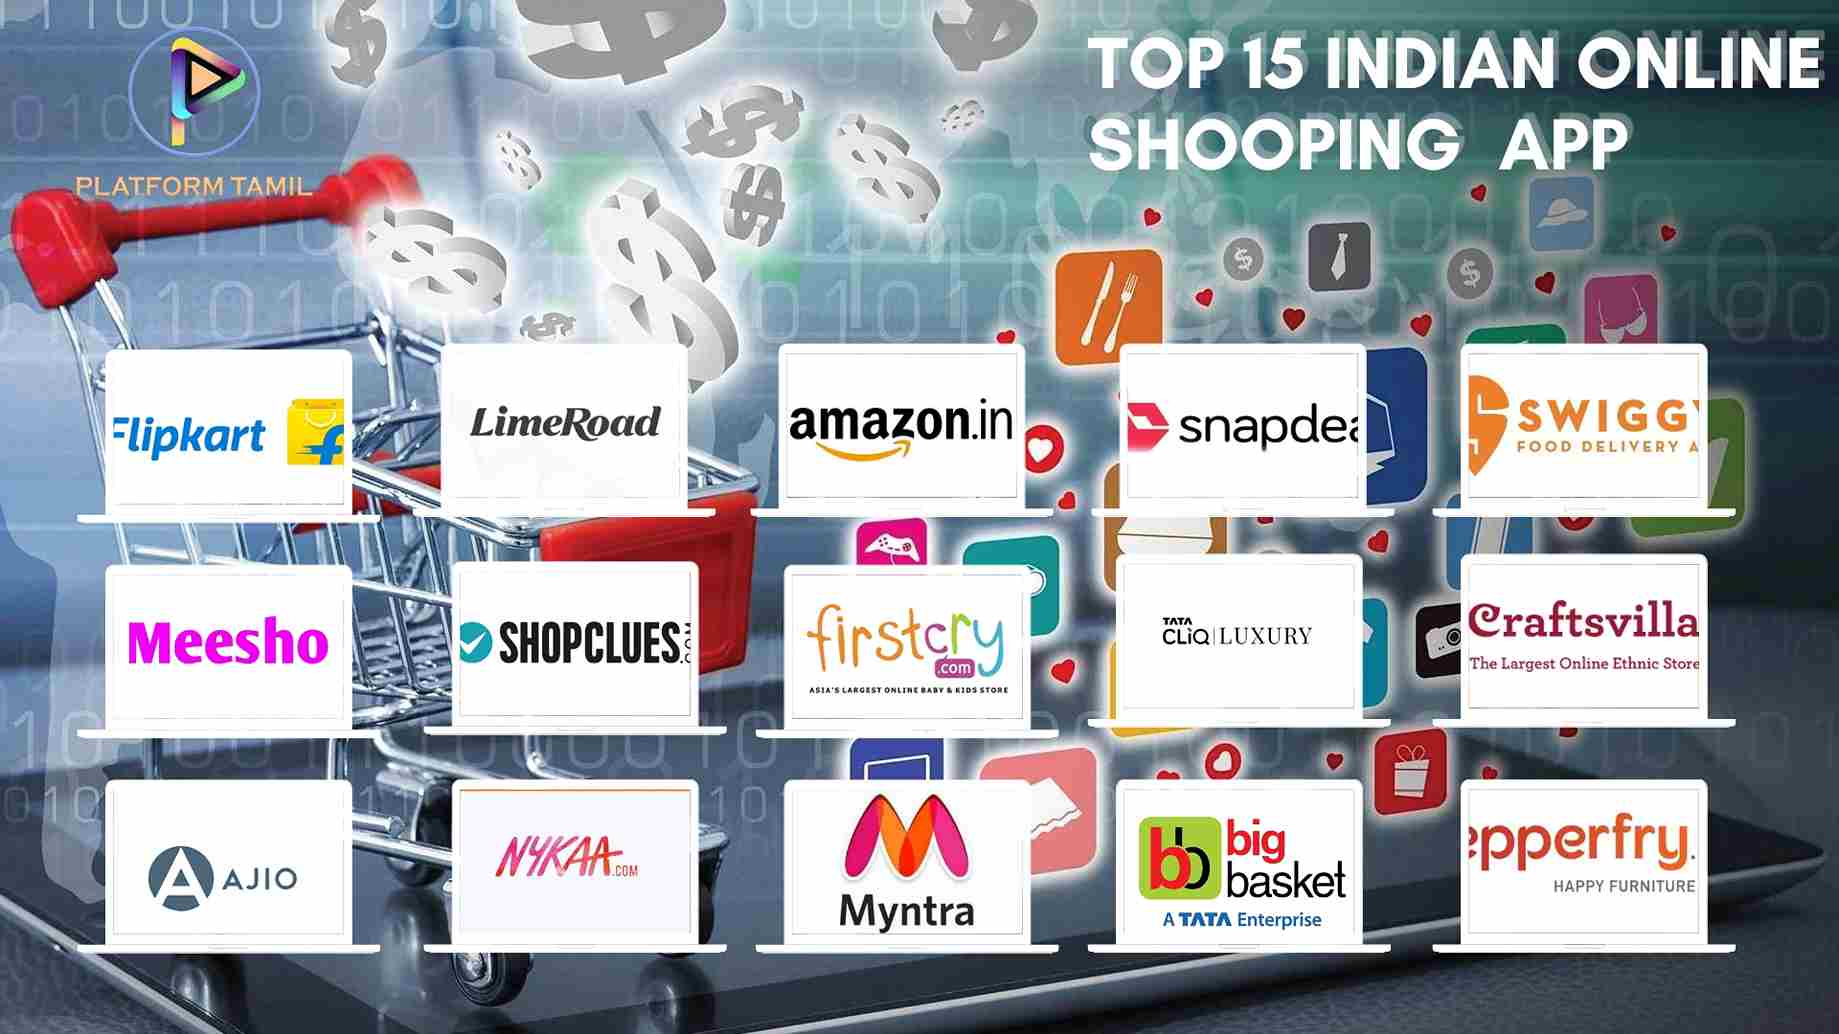 Best Online Shopping Apps in India - Platform Tamil